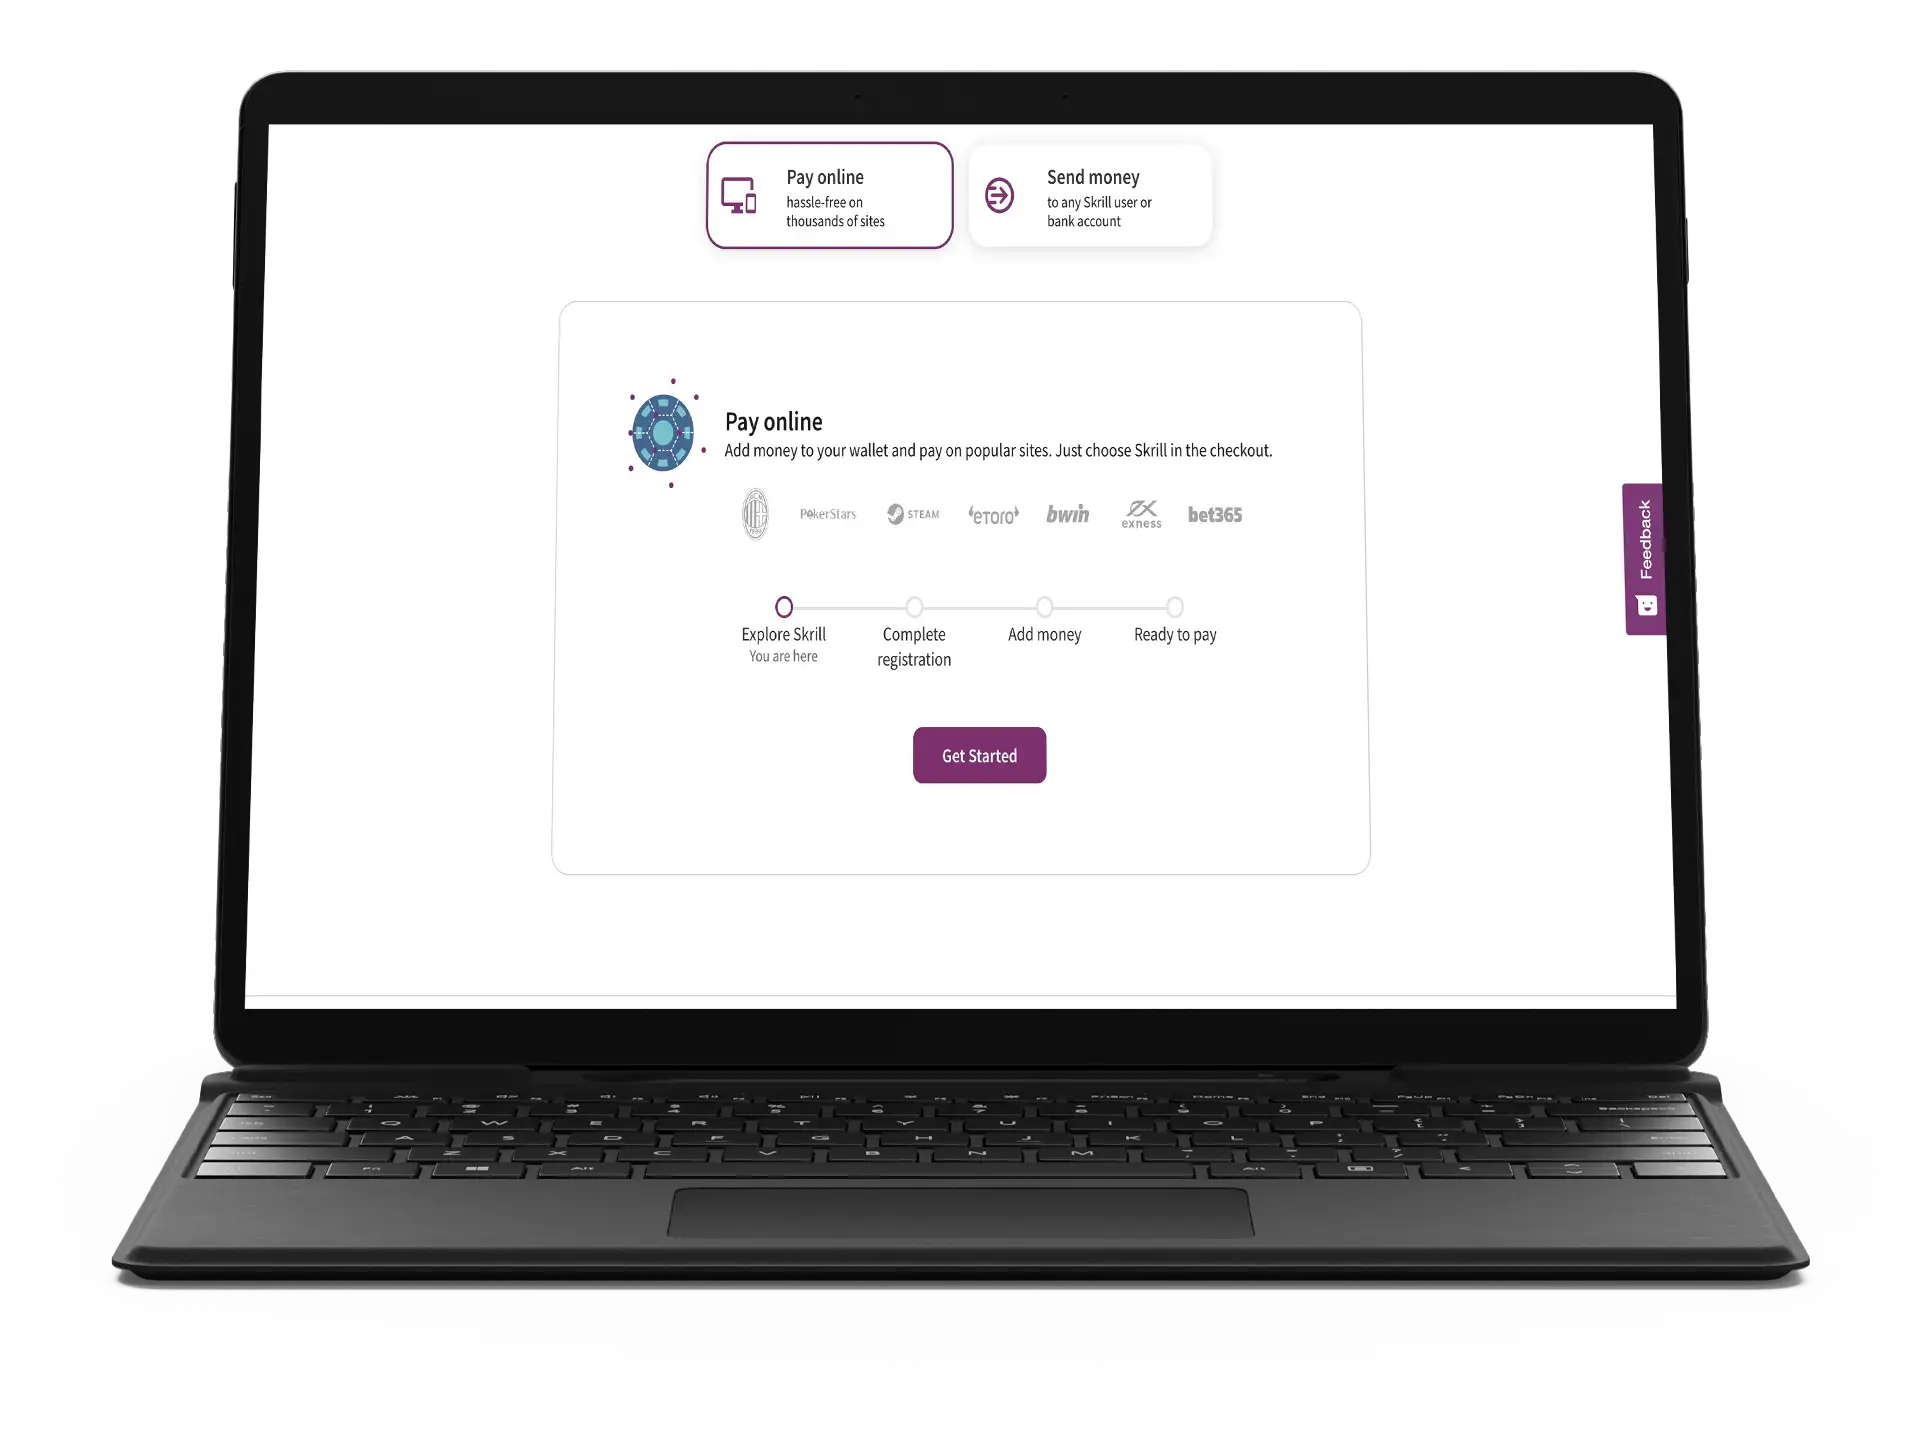 For your account to be fully functional you need to complete a simple identity verification procedure on the Skrill platform.